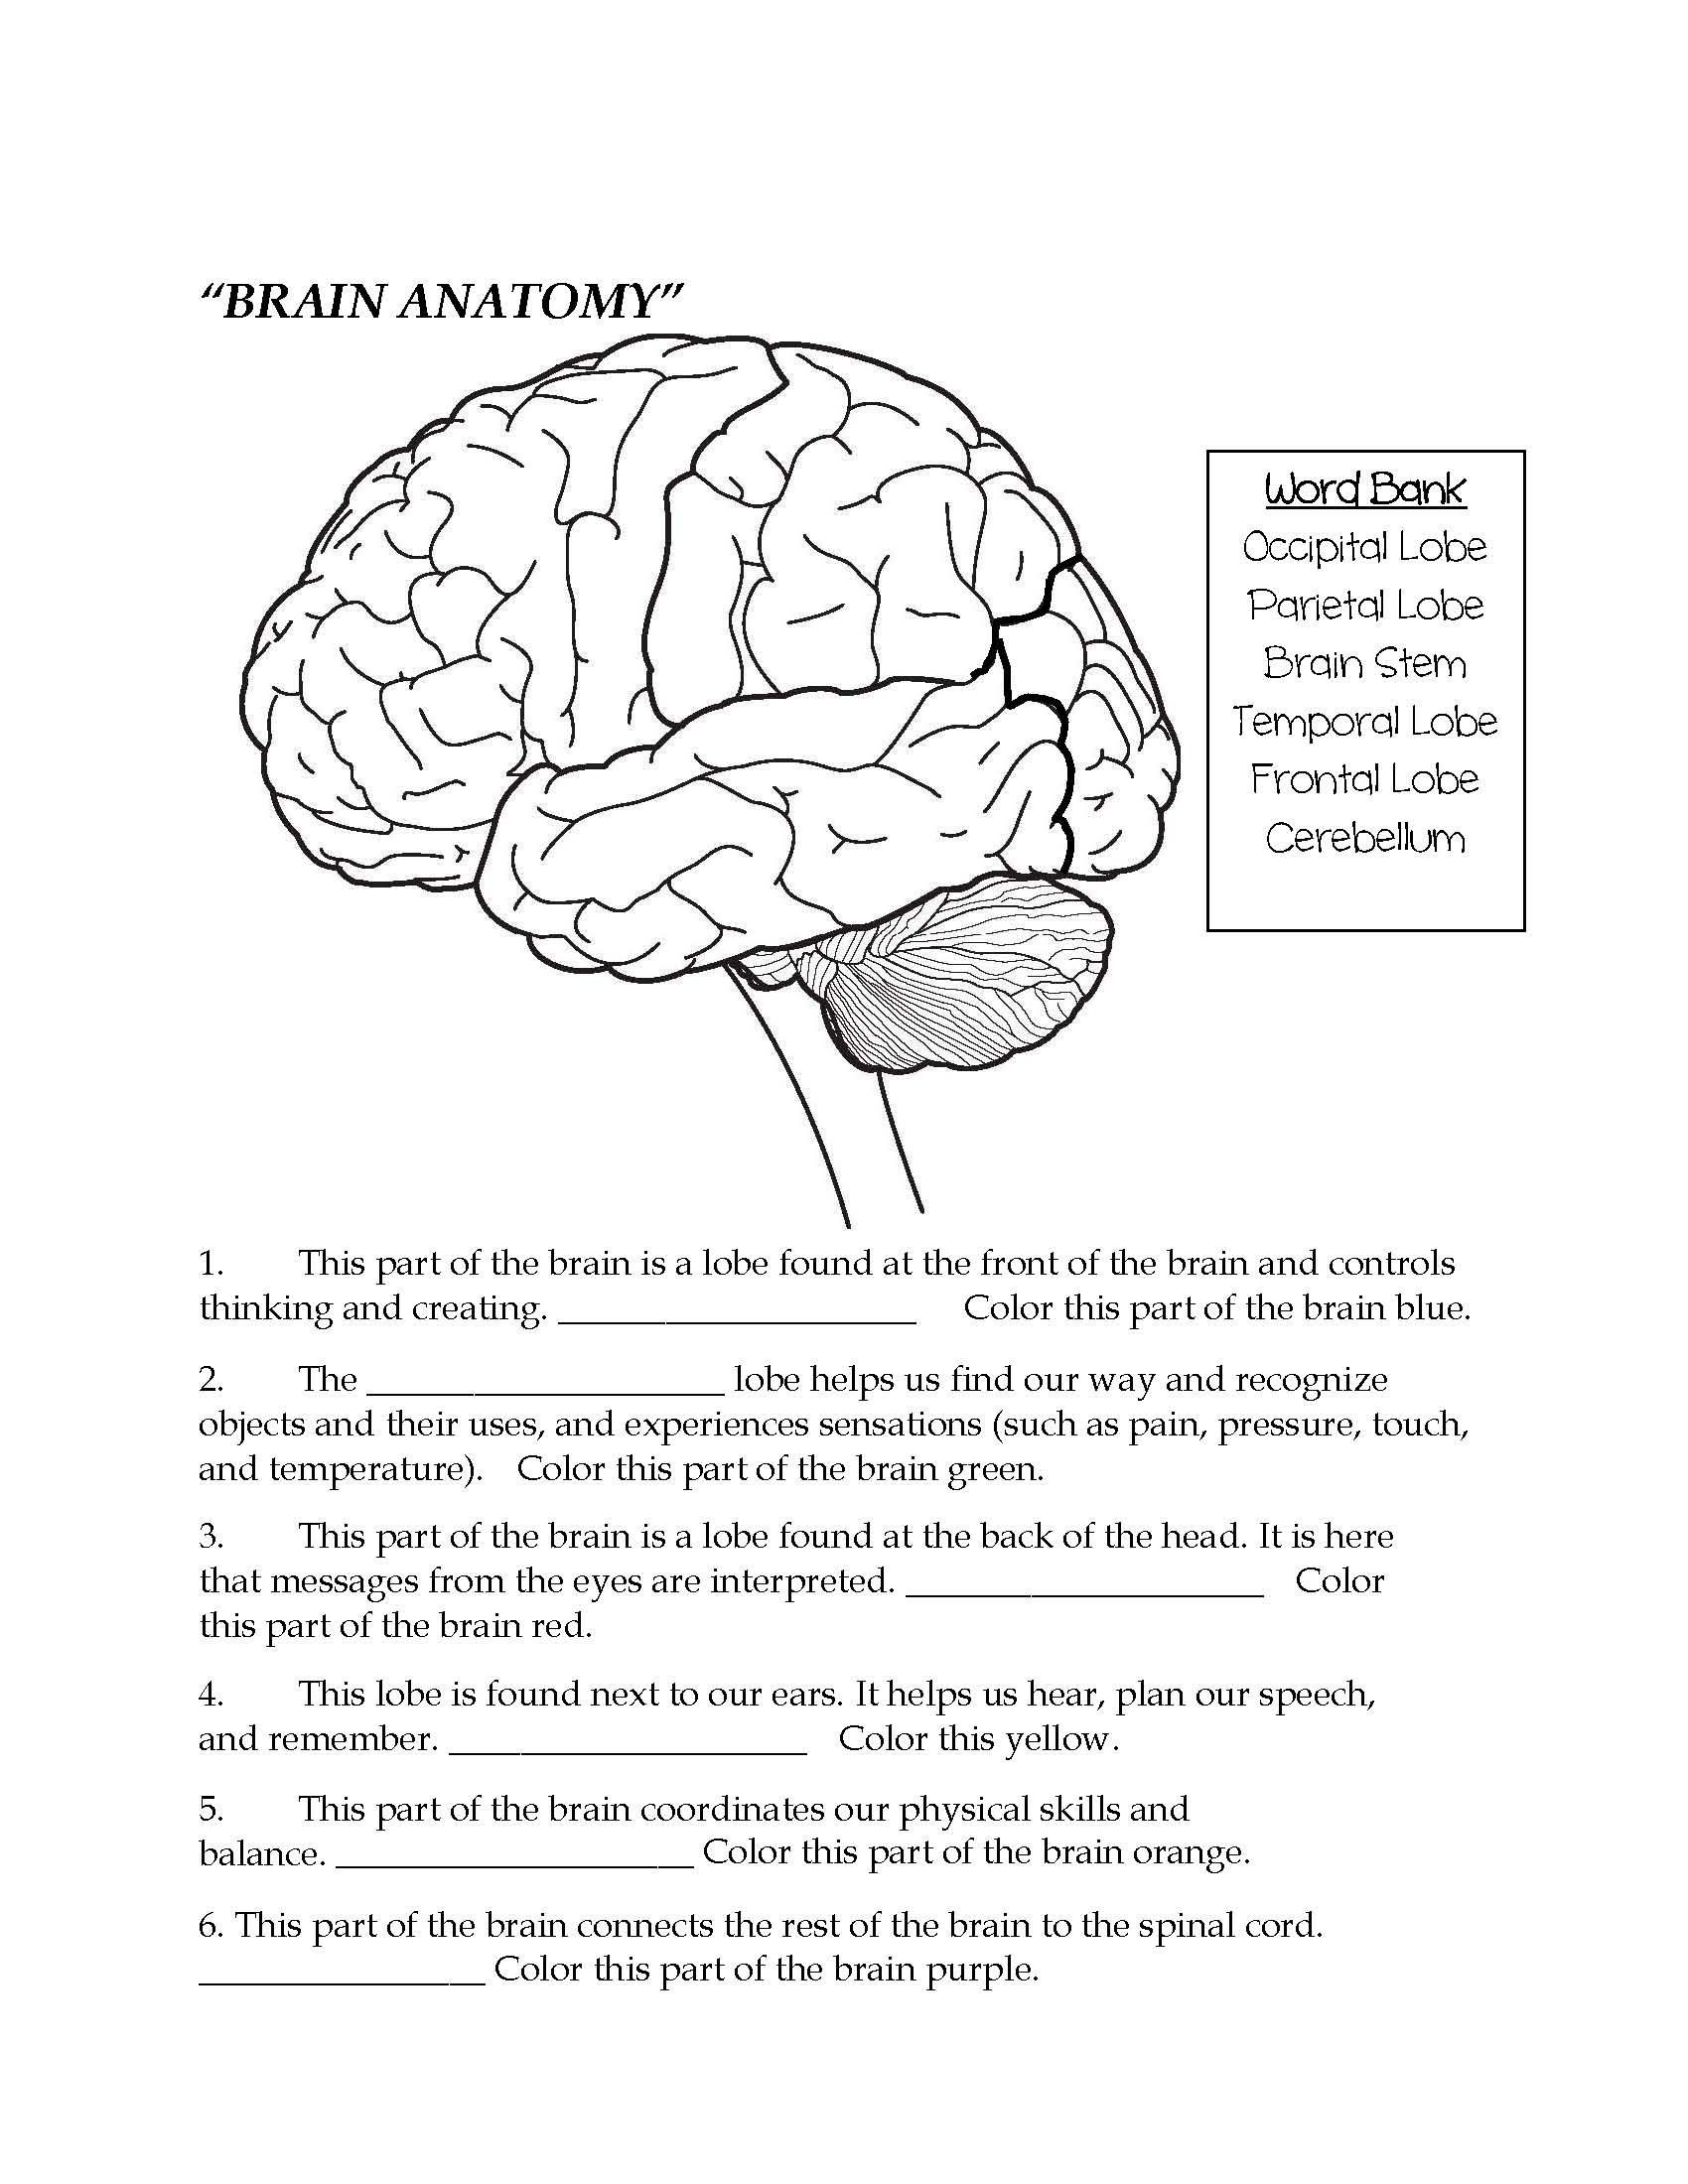 Nervous System Worksheet High School Brain Parts Fill In the Blank &amp; Color